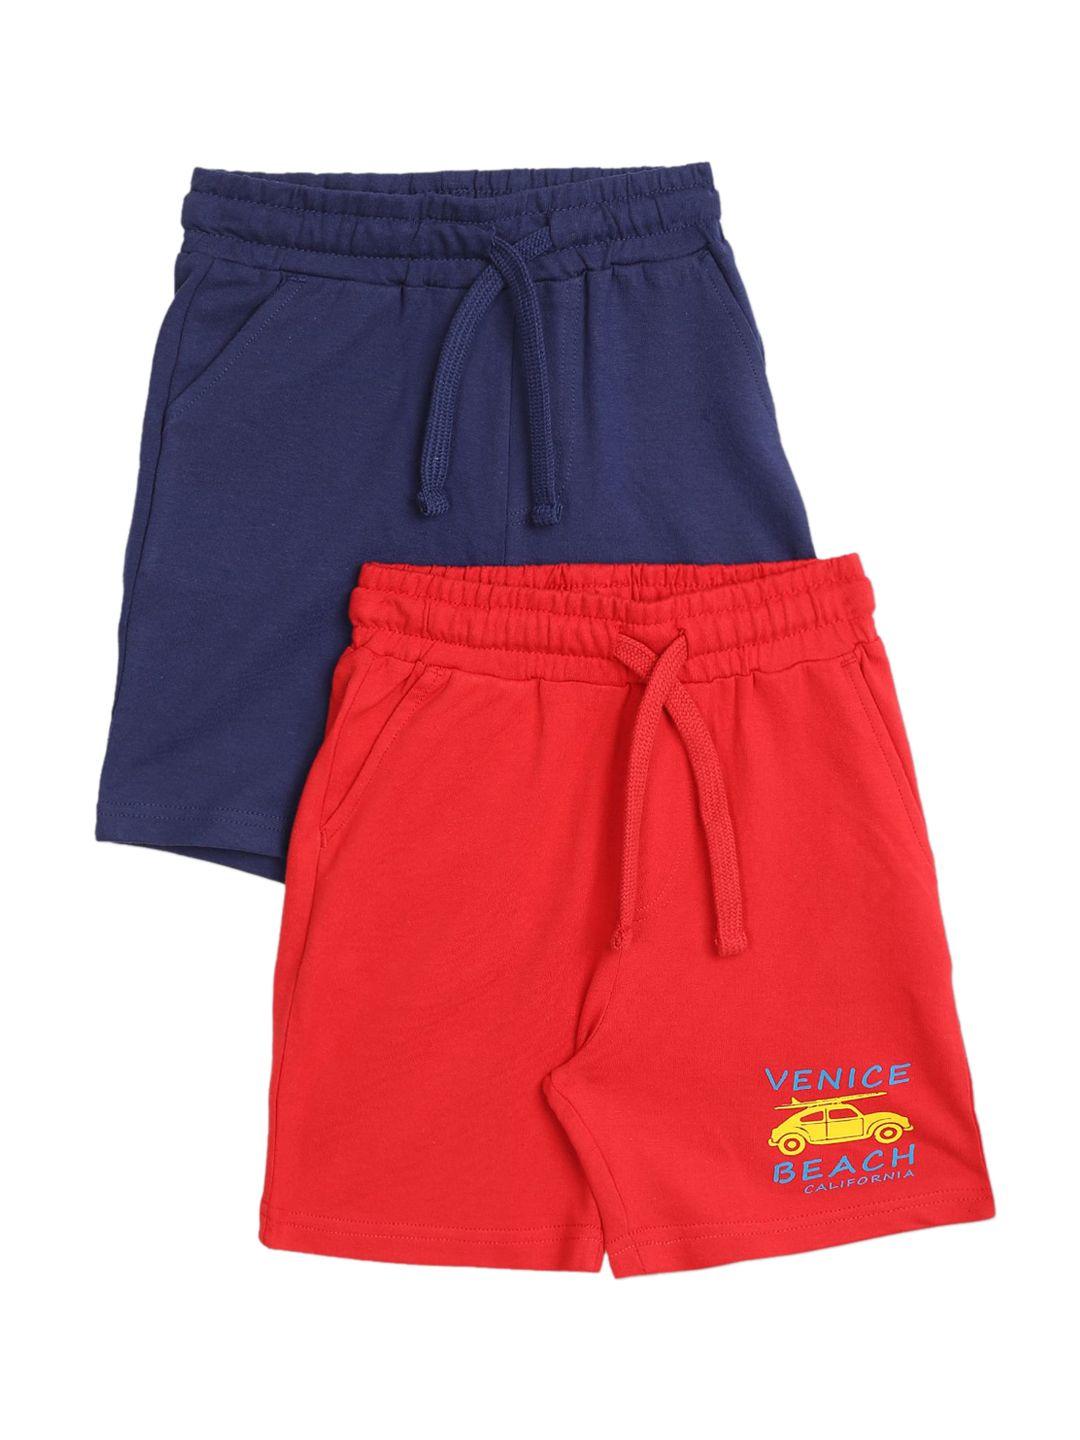 donuts boys assorted pack of 2 shorts